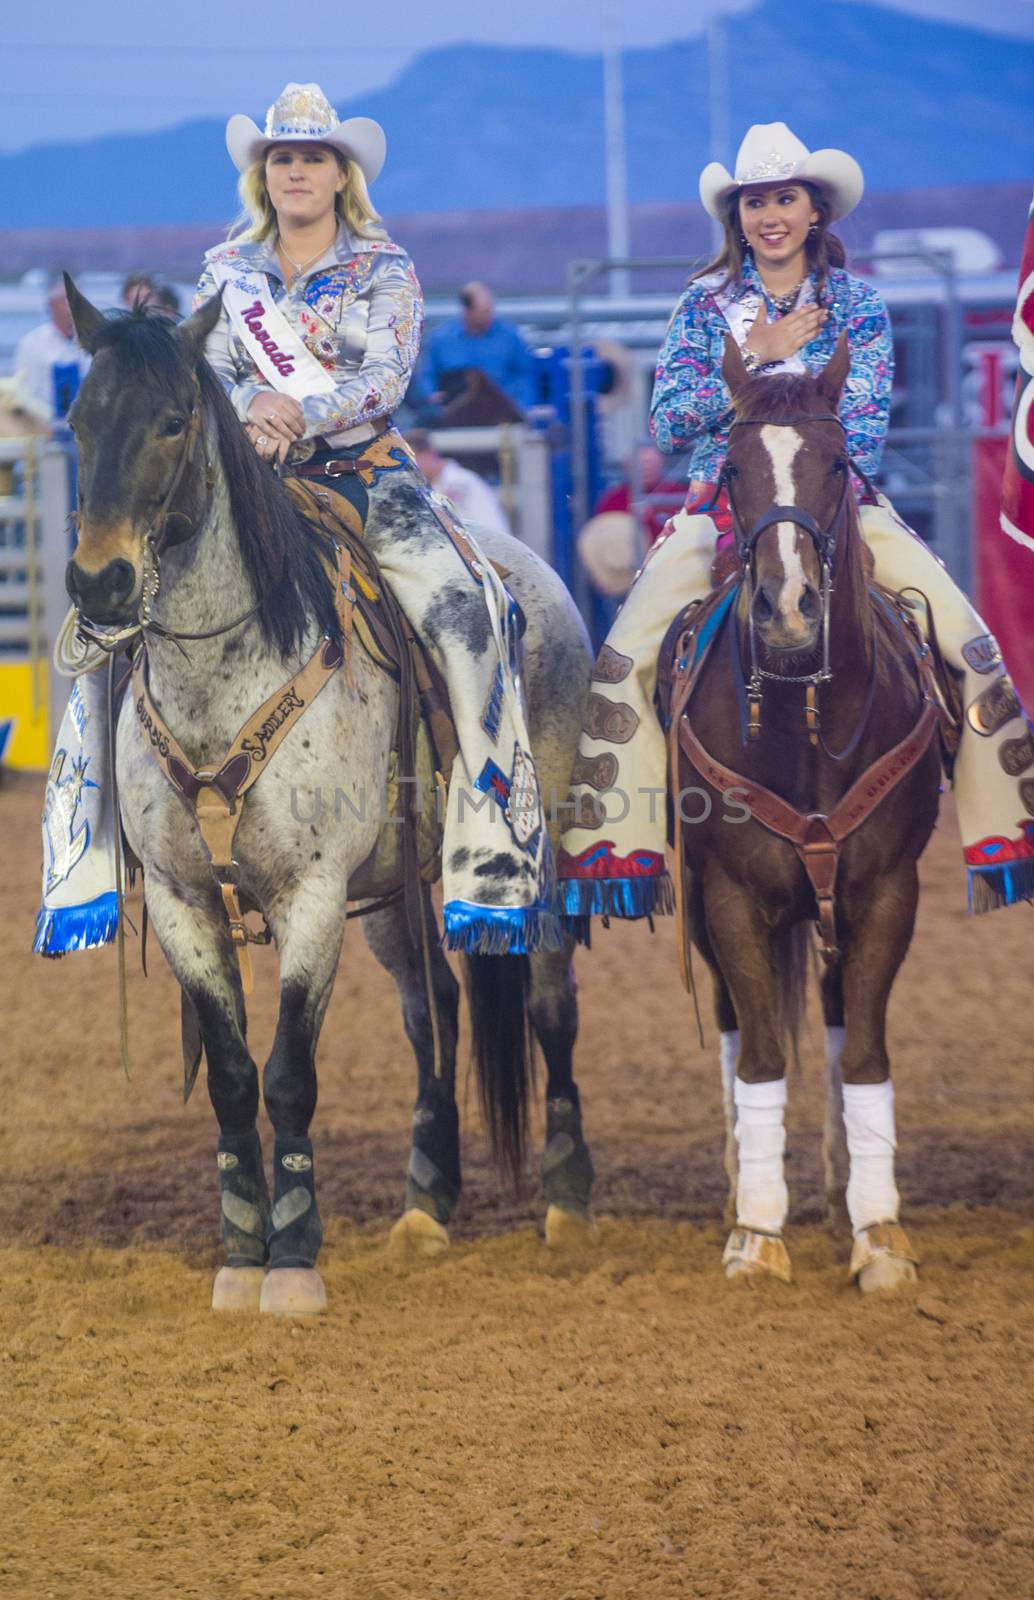 LOGANDALE , NEVADA - APRIL 10 : Cowgirls Participates in the opening ceremony of the Clark County Rodeo held in Logandale Nevada , USA on April 10 , 2014